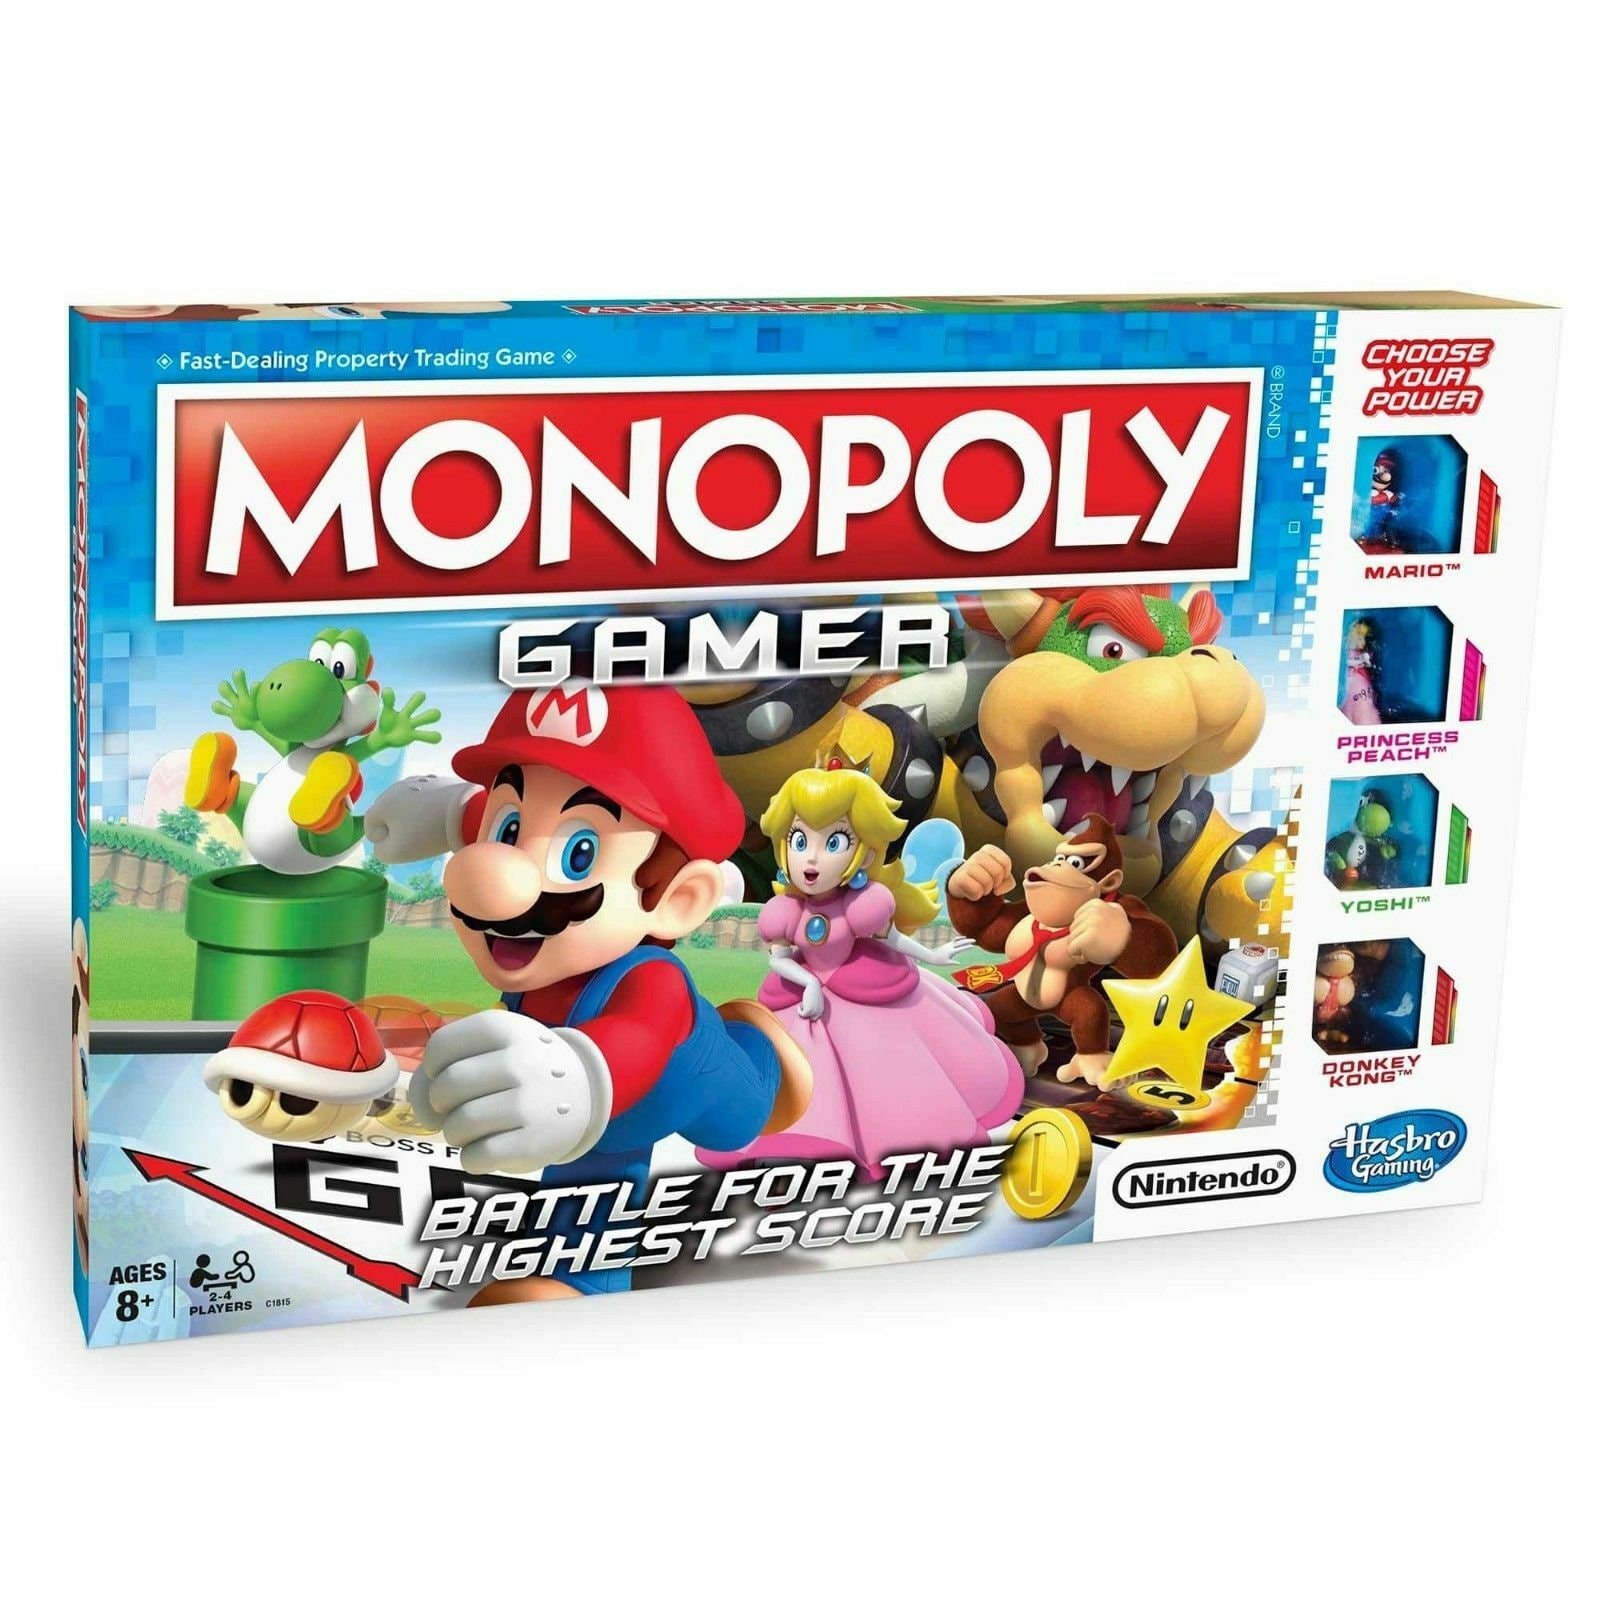 Monopoly Gamer Power Pack Mario Kart Game Piece Token Board Game Pick a Piece 